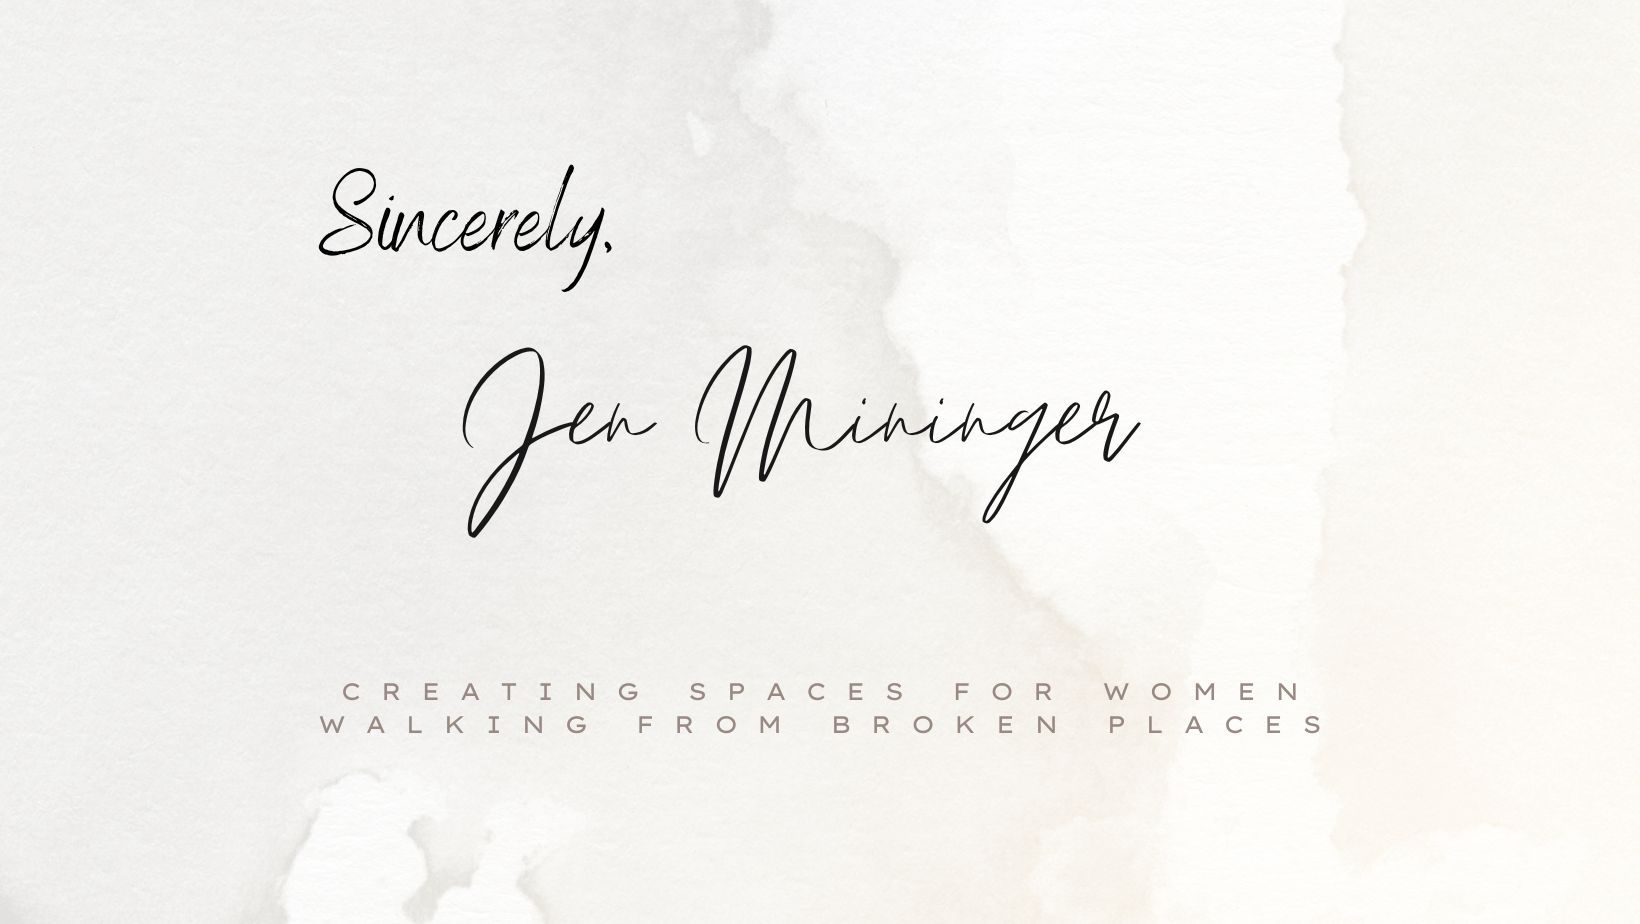 restorable retreat, hope, healing, freedom, recovery, forgiveness, space, time, Jen Mininger